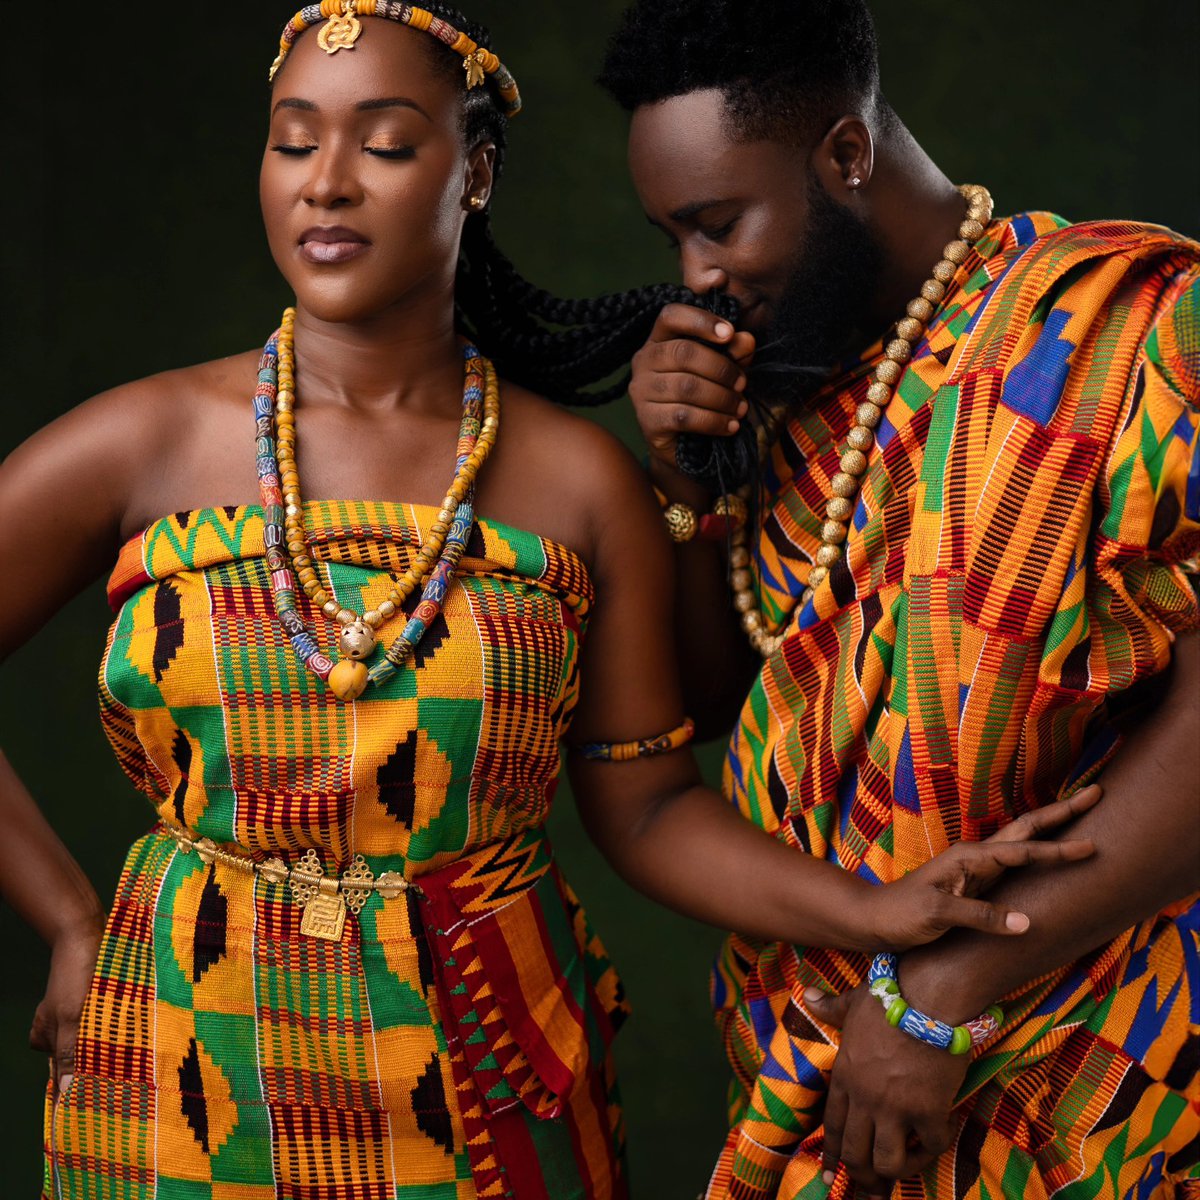 .@UNESCO 's words that 'Culture and creativity are the heartbeat of our societies,' find vivid expression in this showcase of Ghanaian traditional attire🇬🇭. Congrats to Kwesi Pratt Yamoah, one of Ghana's finest MCs @mysterpratt & Kokua. 📸@JemaPhotography #HappyFriday #WeMove